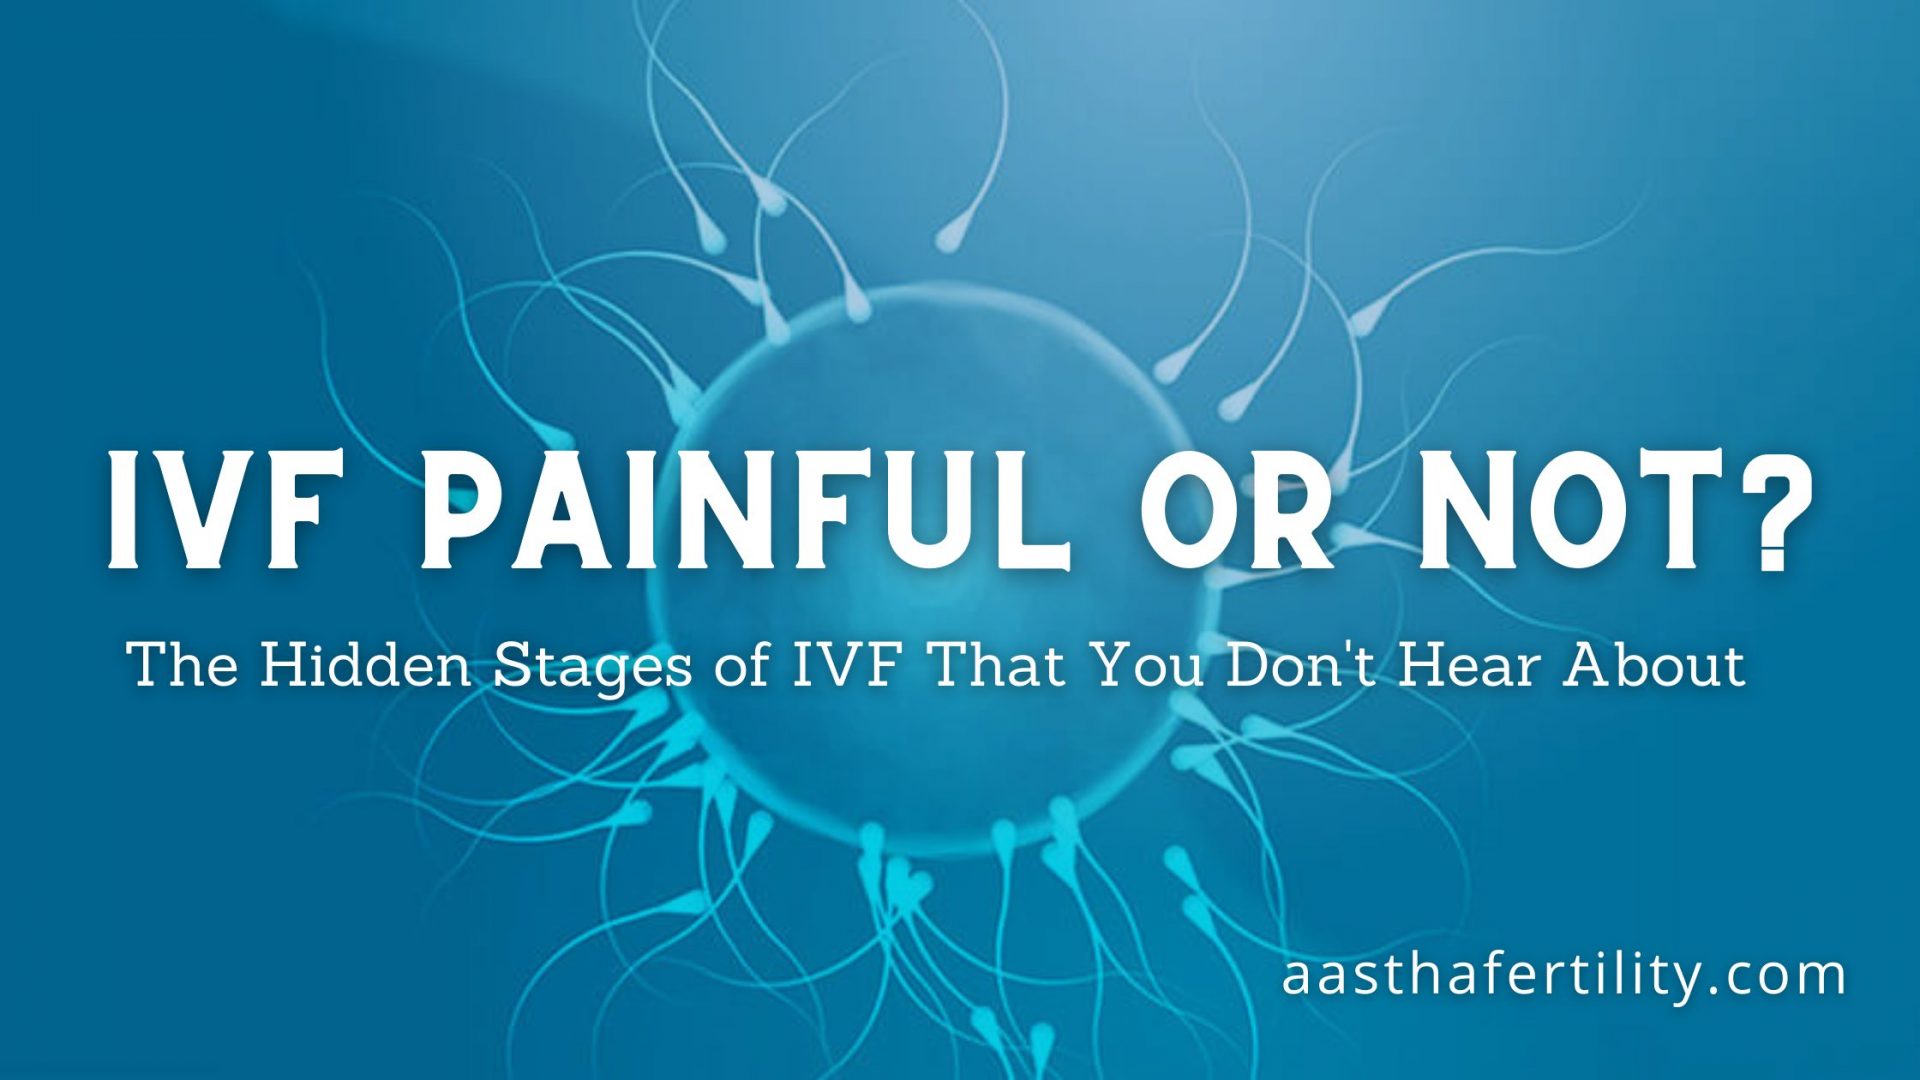 Is IVF Painful Or Not? The Hidden Stages of IVF